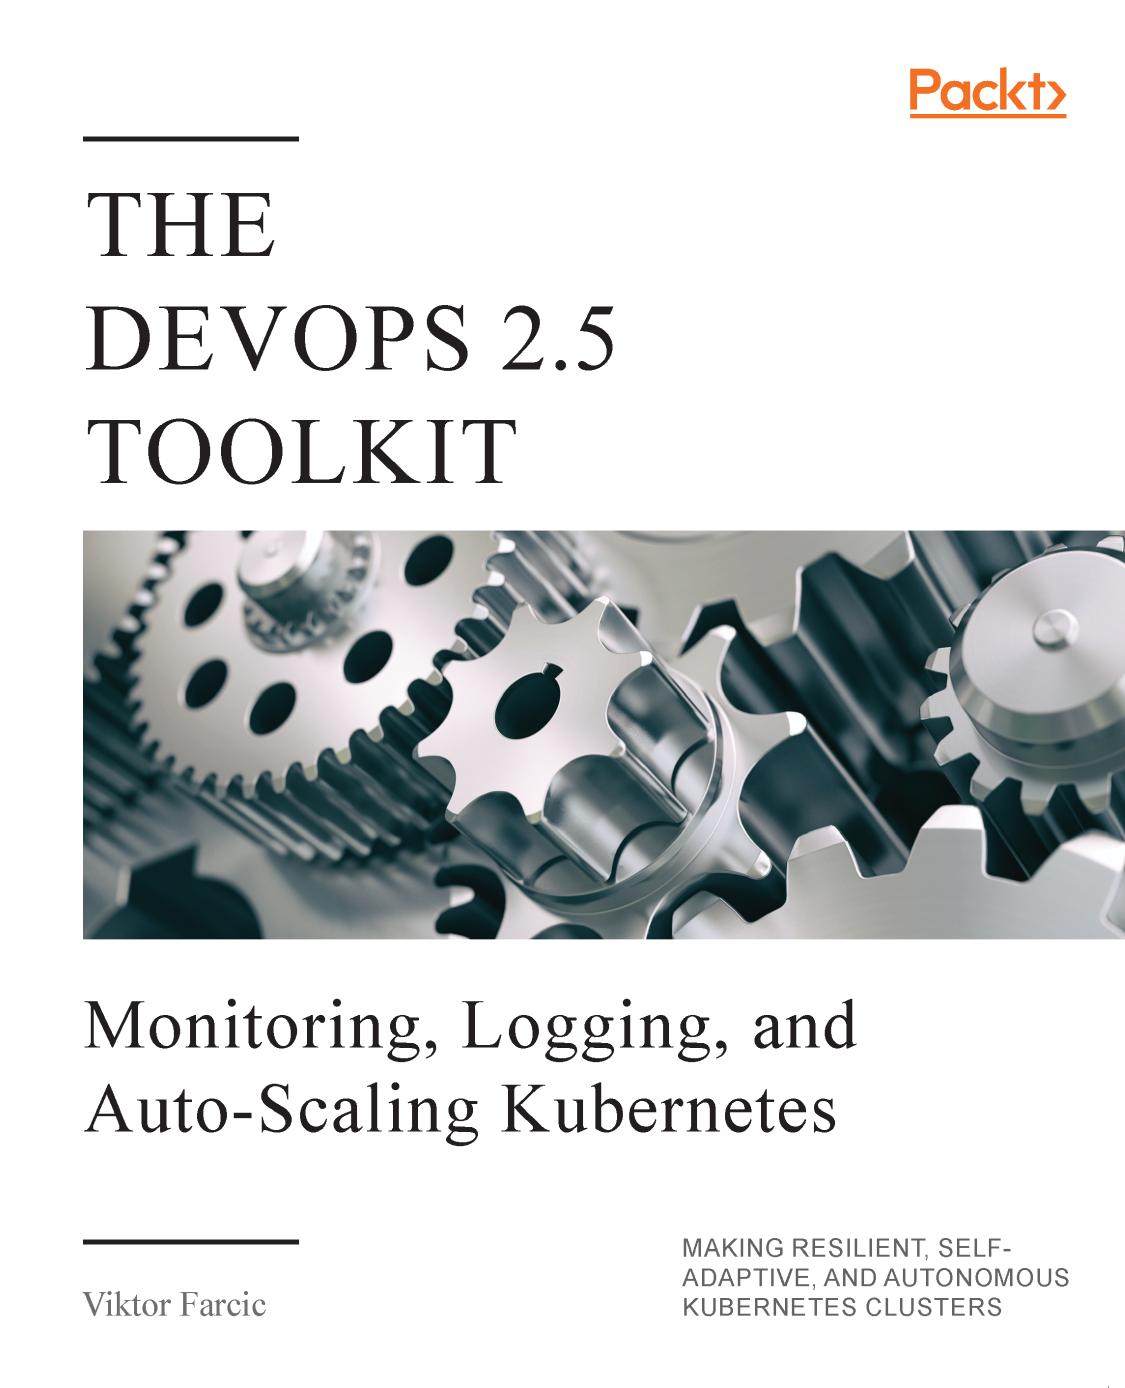 The DevOps 2. 5 Toolkit: Monitoring, Logging, and Auto-Scaling Kubernetes: Making Resilient, Self-Adaptive, and Autonomous Kubernetes Clusters